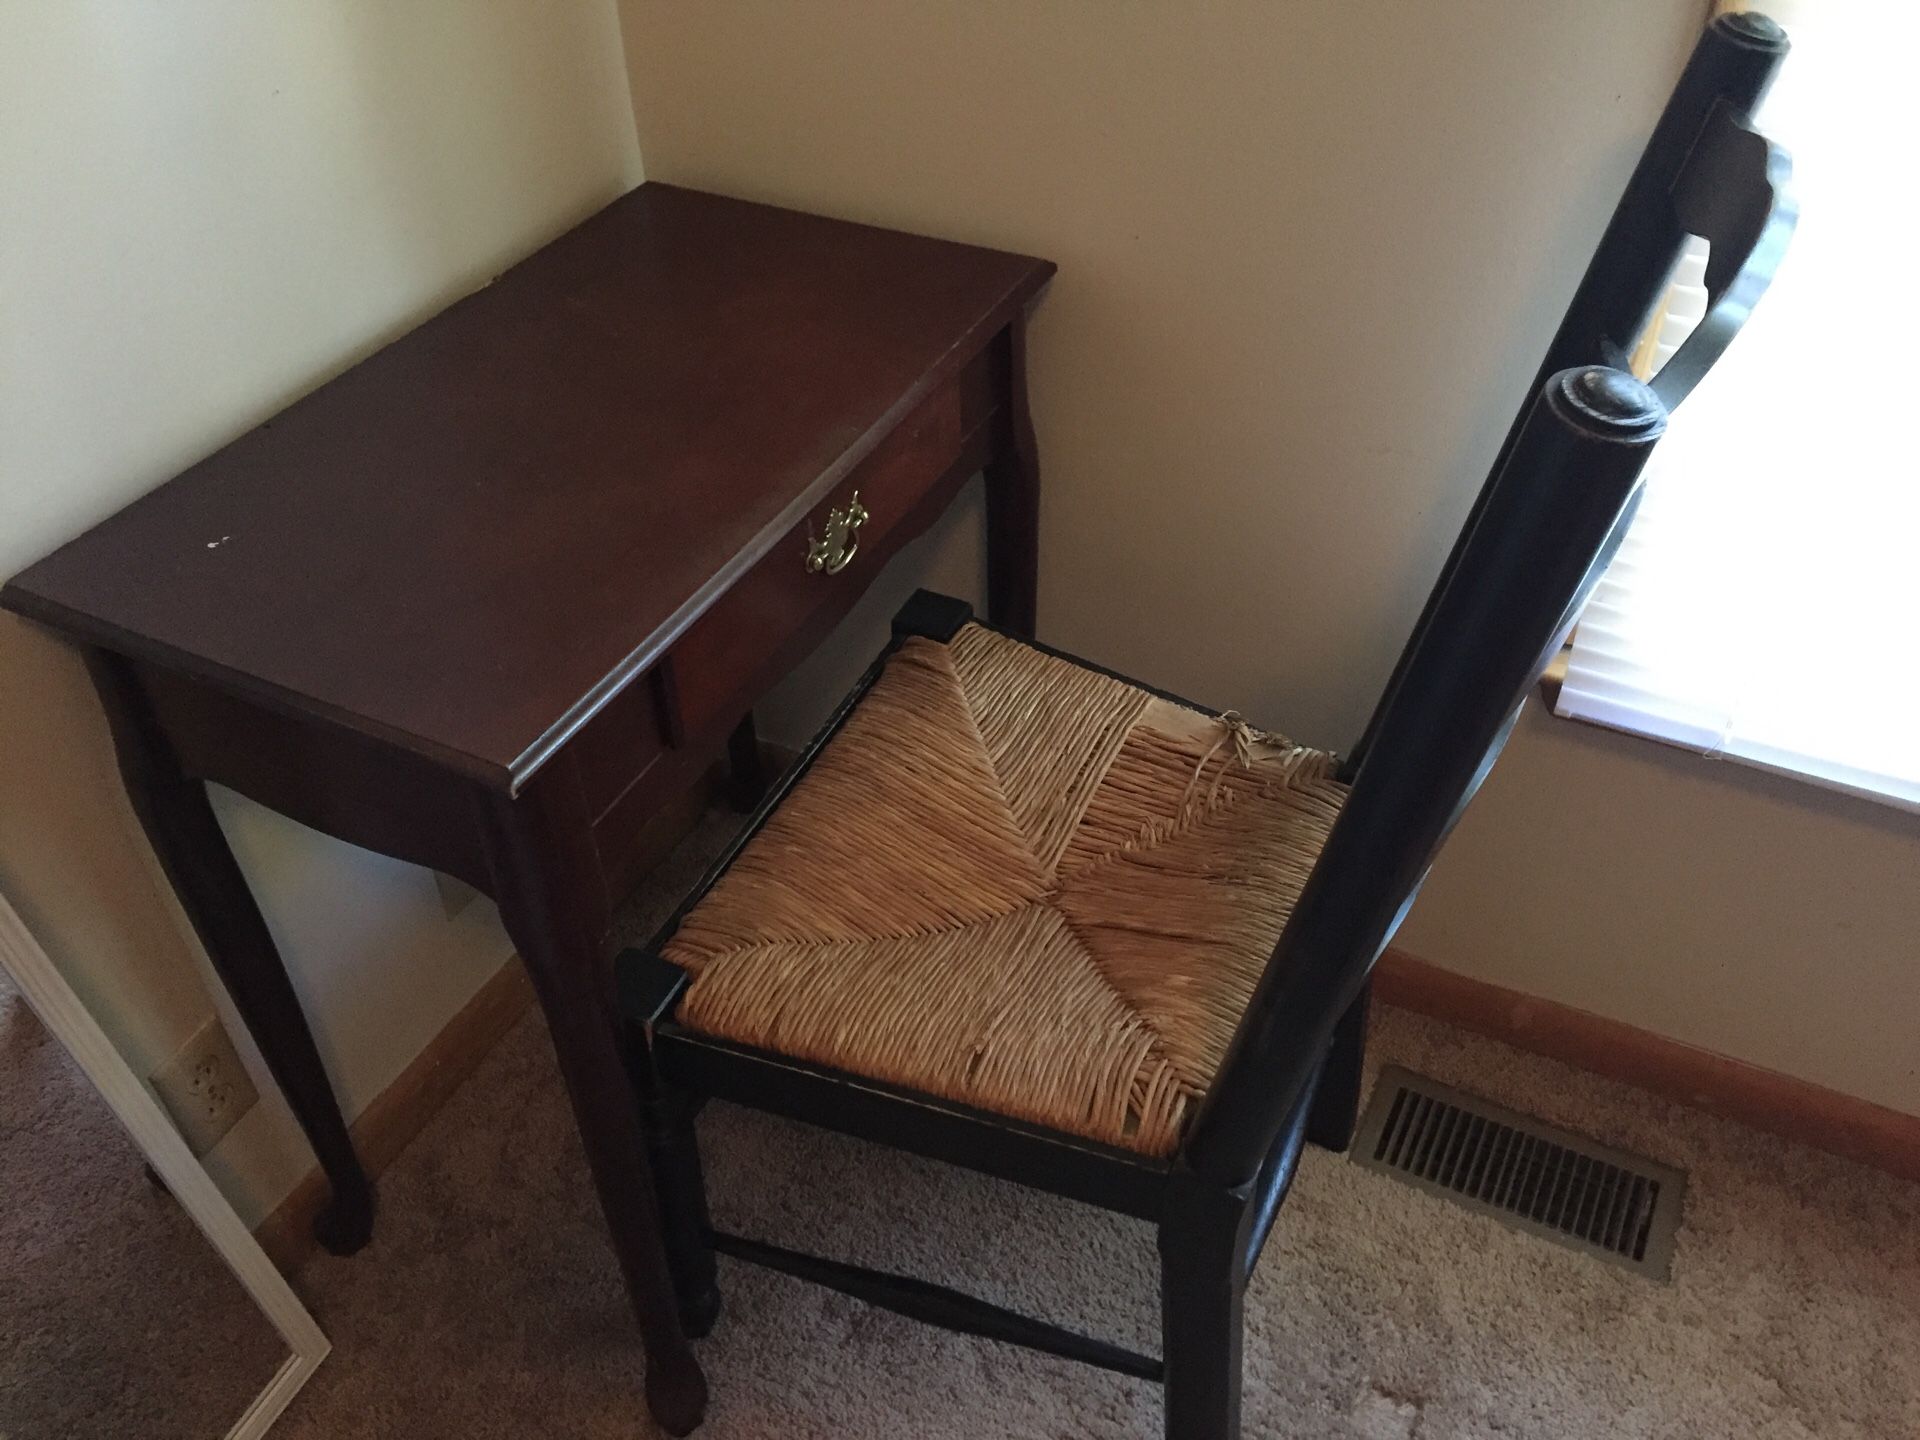 Vanity table and chair